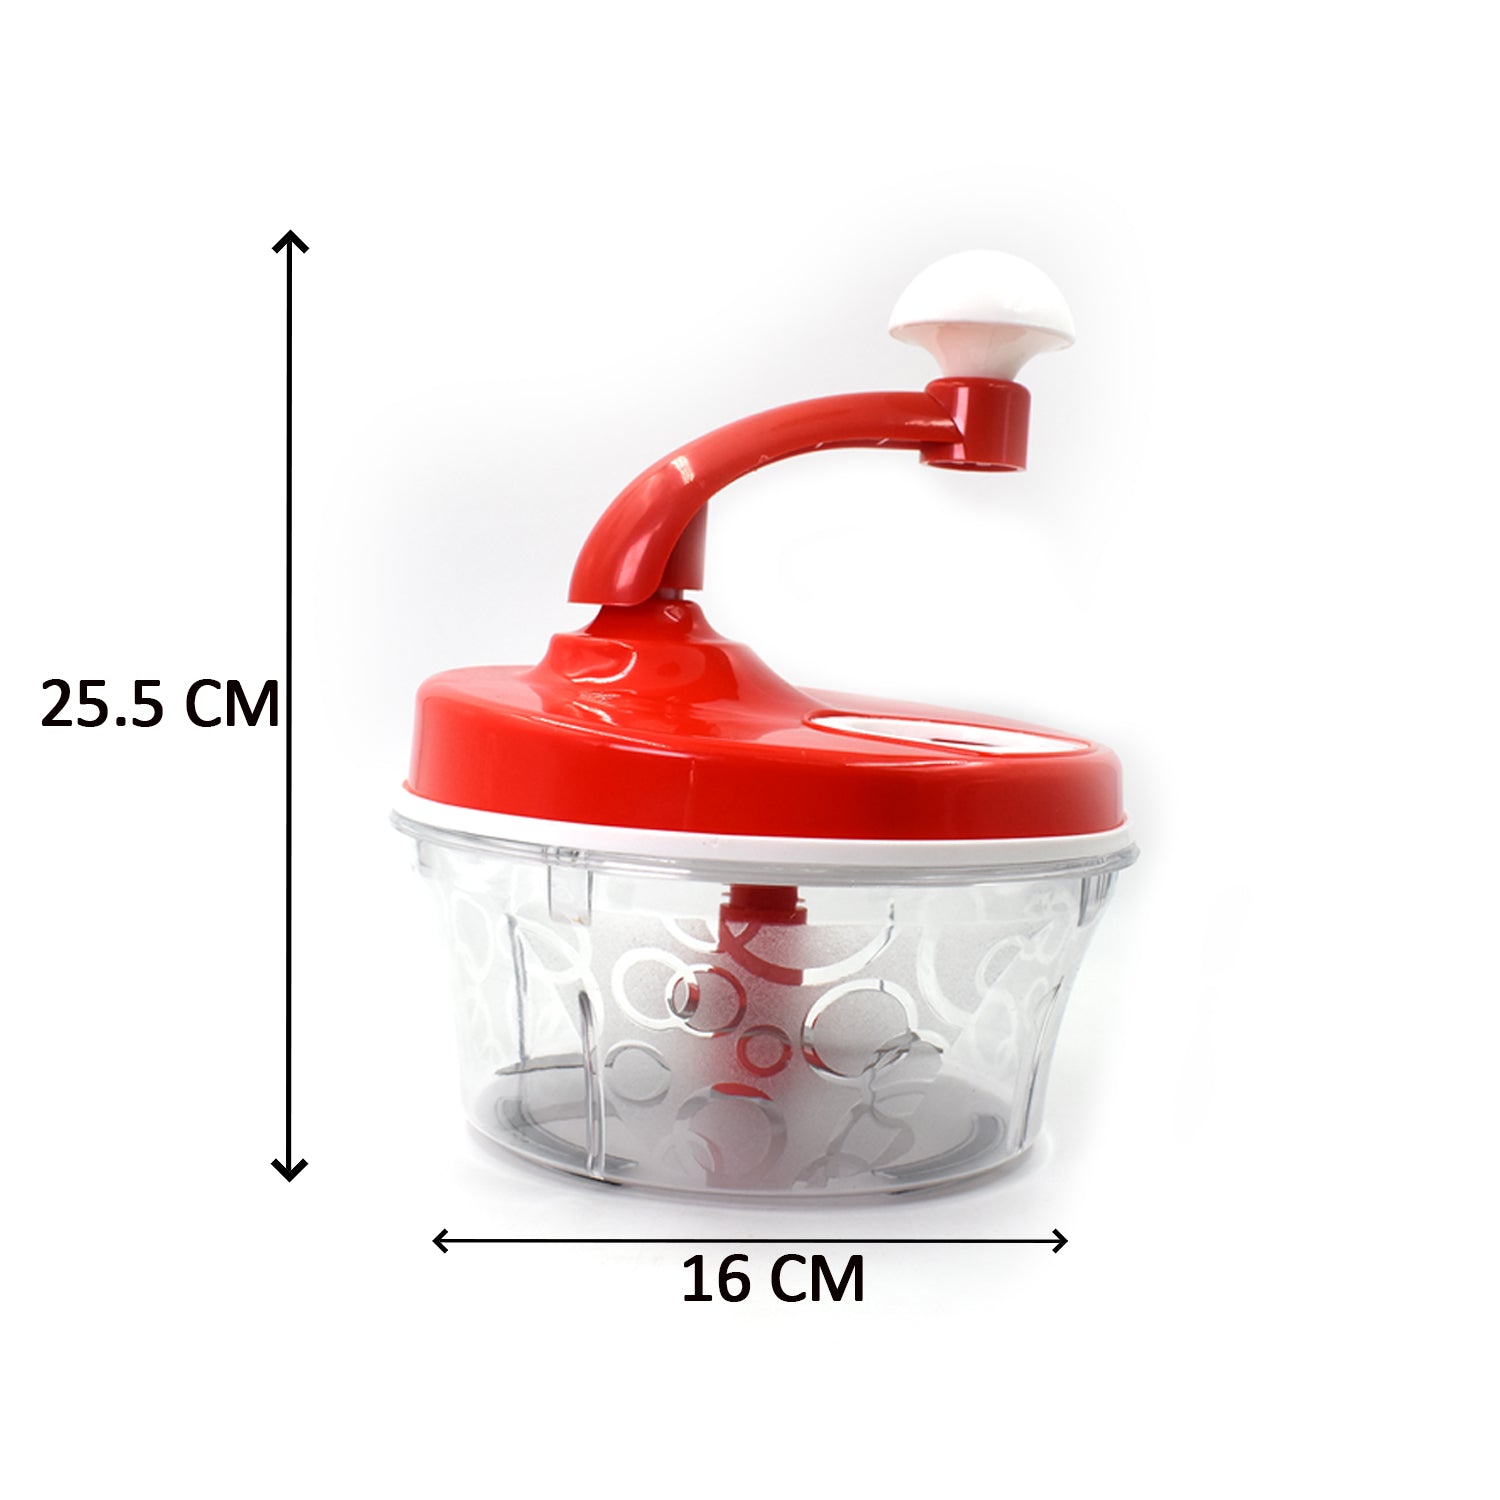 2721 10 in 1 Food Processor widely used in all kinds of household purposes for making the process of food easy and feasible with the help of these supplements and equipment’s etc. DeoDap